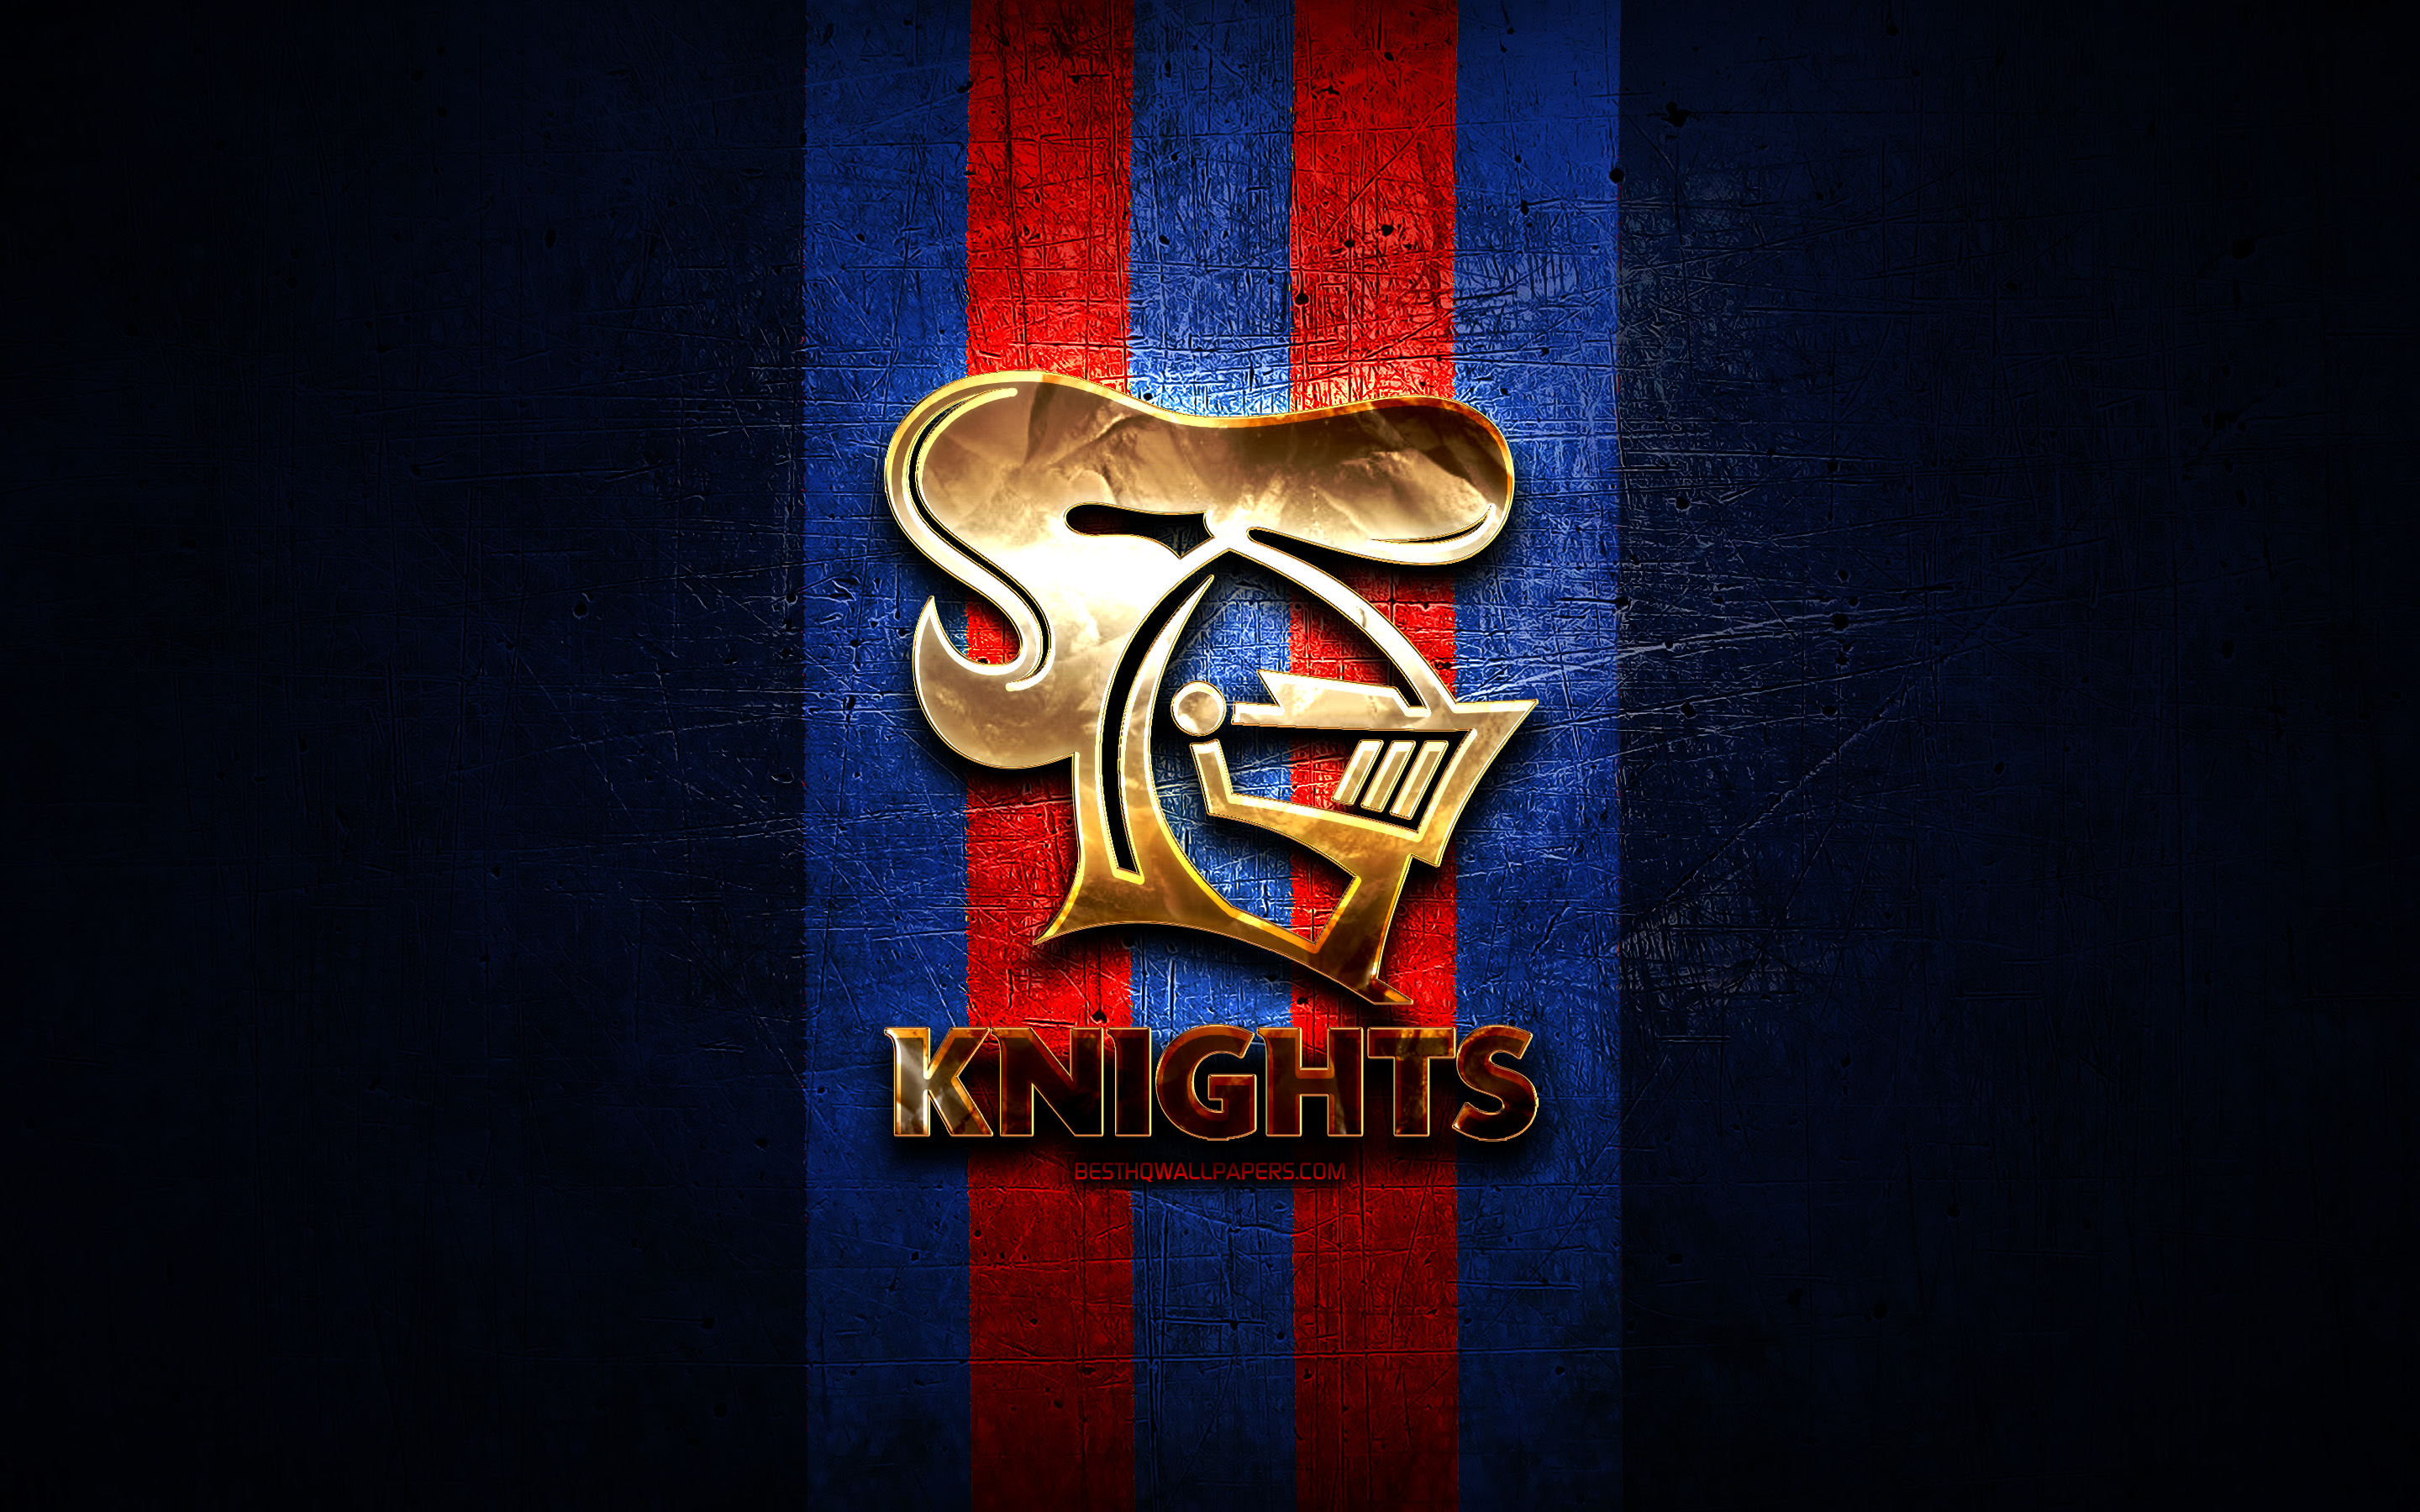 Download wallpaper Newcastle Knights, golden logo, National Rugby League, blue metal background, australian rugby club, Newcastle Knights logo, rugby, NRL for desktop with resolution 2880x1800. High Quality HD picture wallpaper